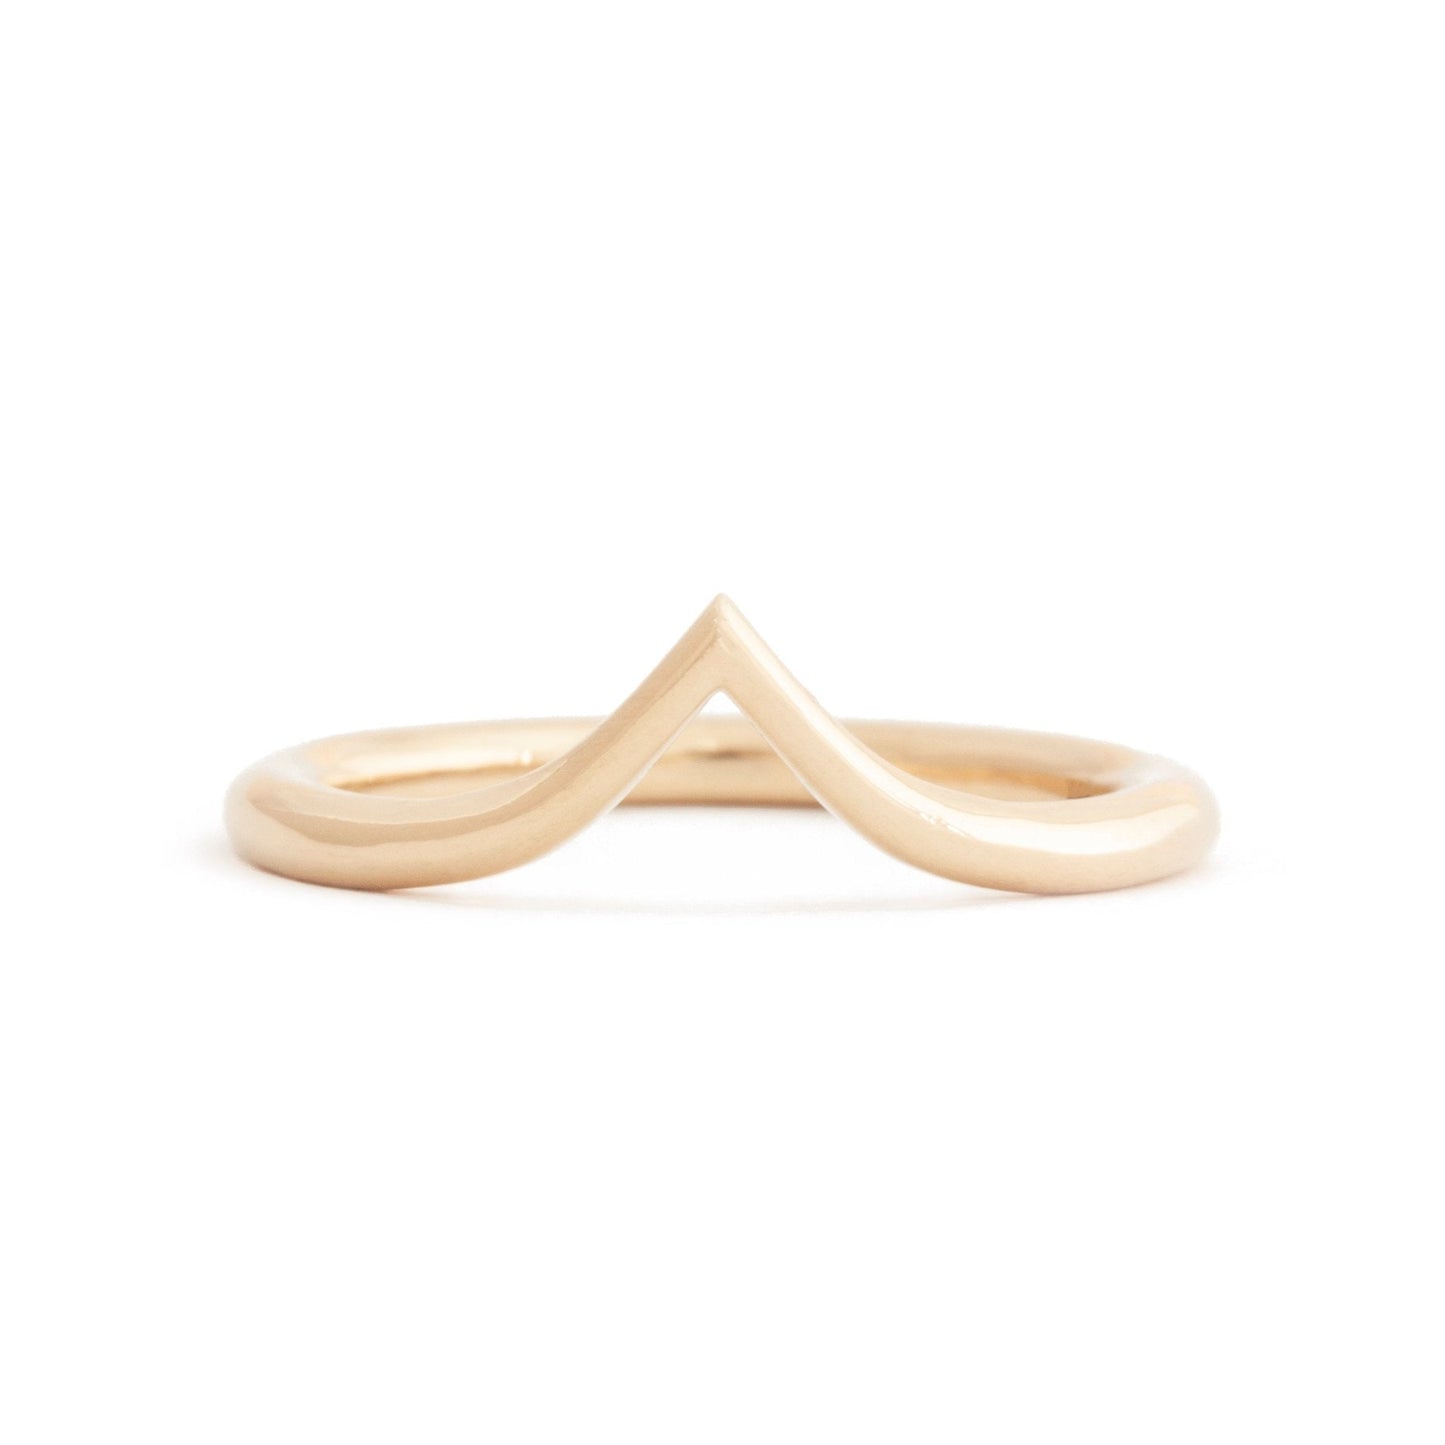 The Fairmined Pointed Contour Ring (Ready to ship in size 4 with a polished finish) - W.R. Metalarts